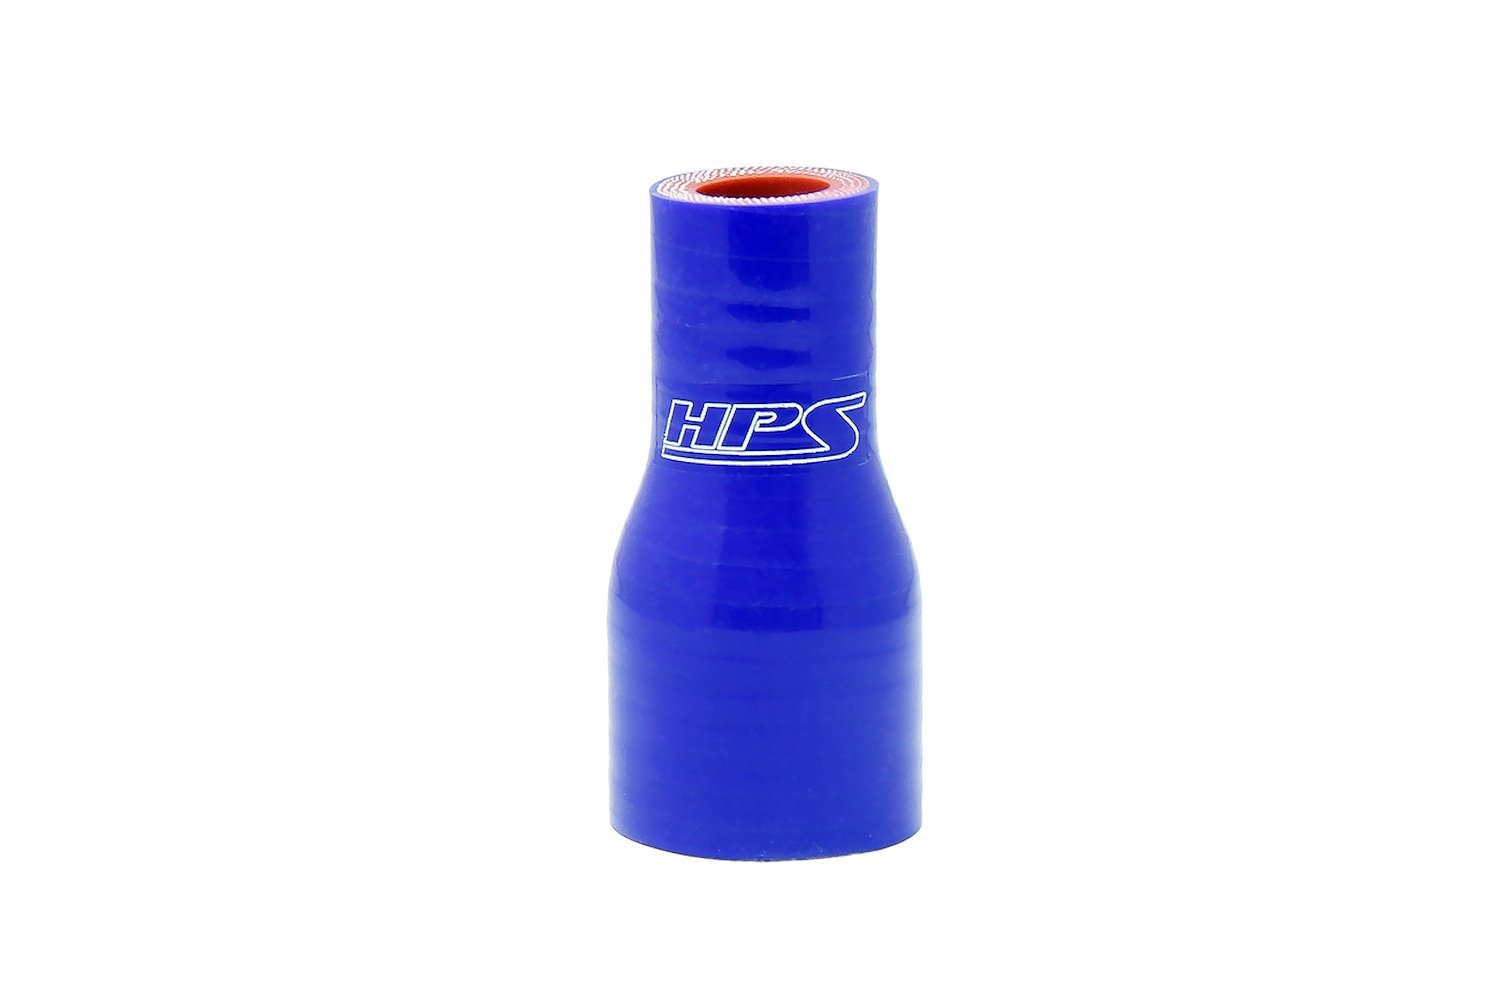 HTSR-087-112-BLUE Silicone Reducer Hose, High-Temp 4-Ply Reinforced, 7/8 in. - 1-1/8 in. ID, 3 in. Long, Blue